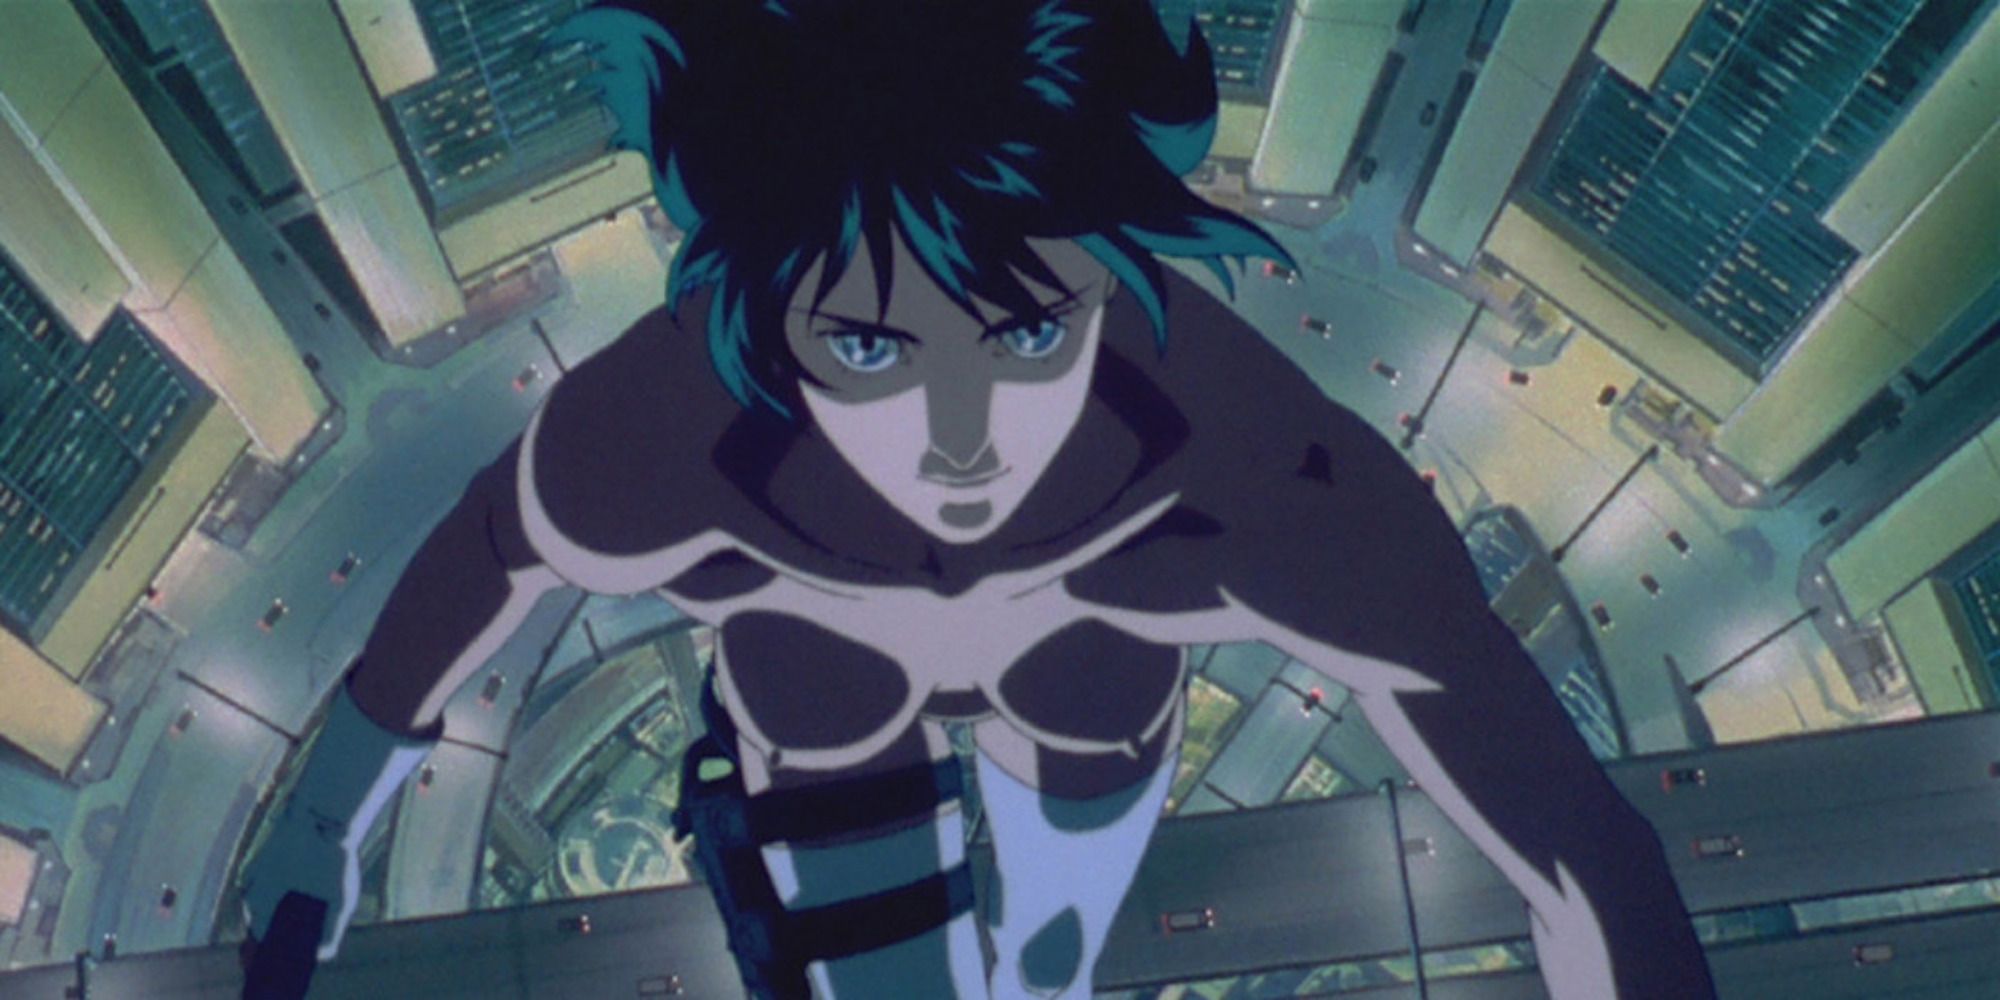 The Major from Ghost In The Shell